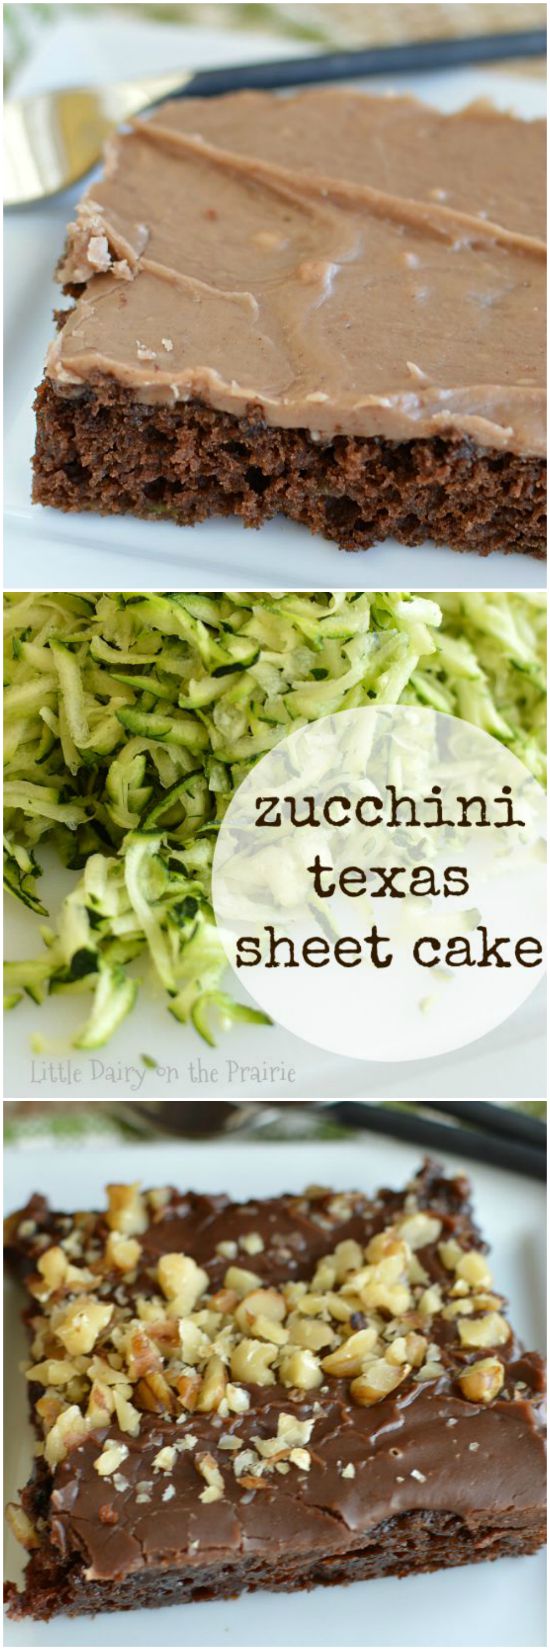 Everything you love about classic Texas sheet cake with the addition of zucchini! I can't get enough of this one! Little Dairy on the Prairie